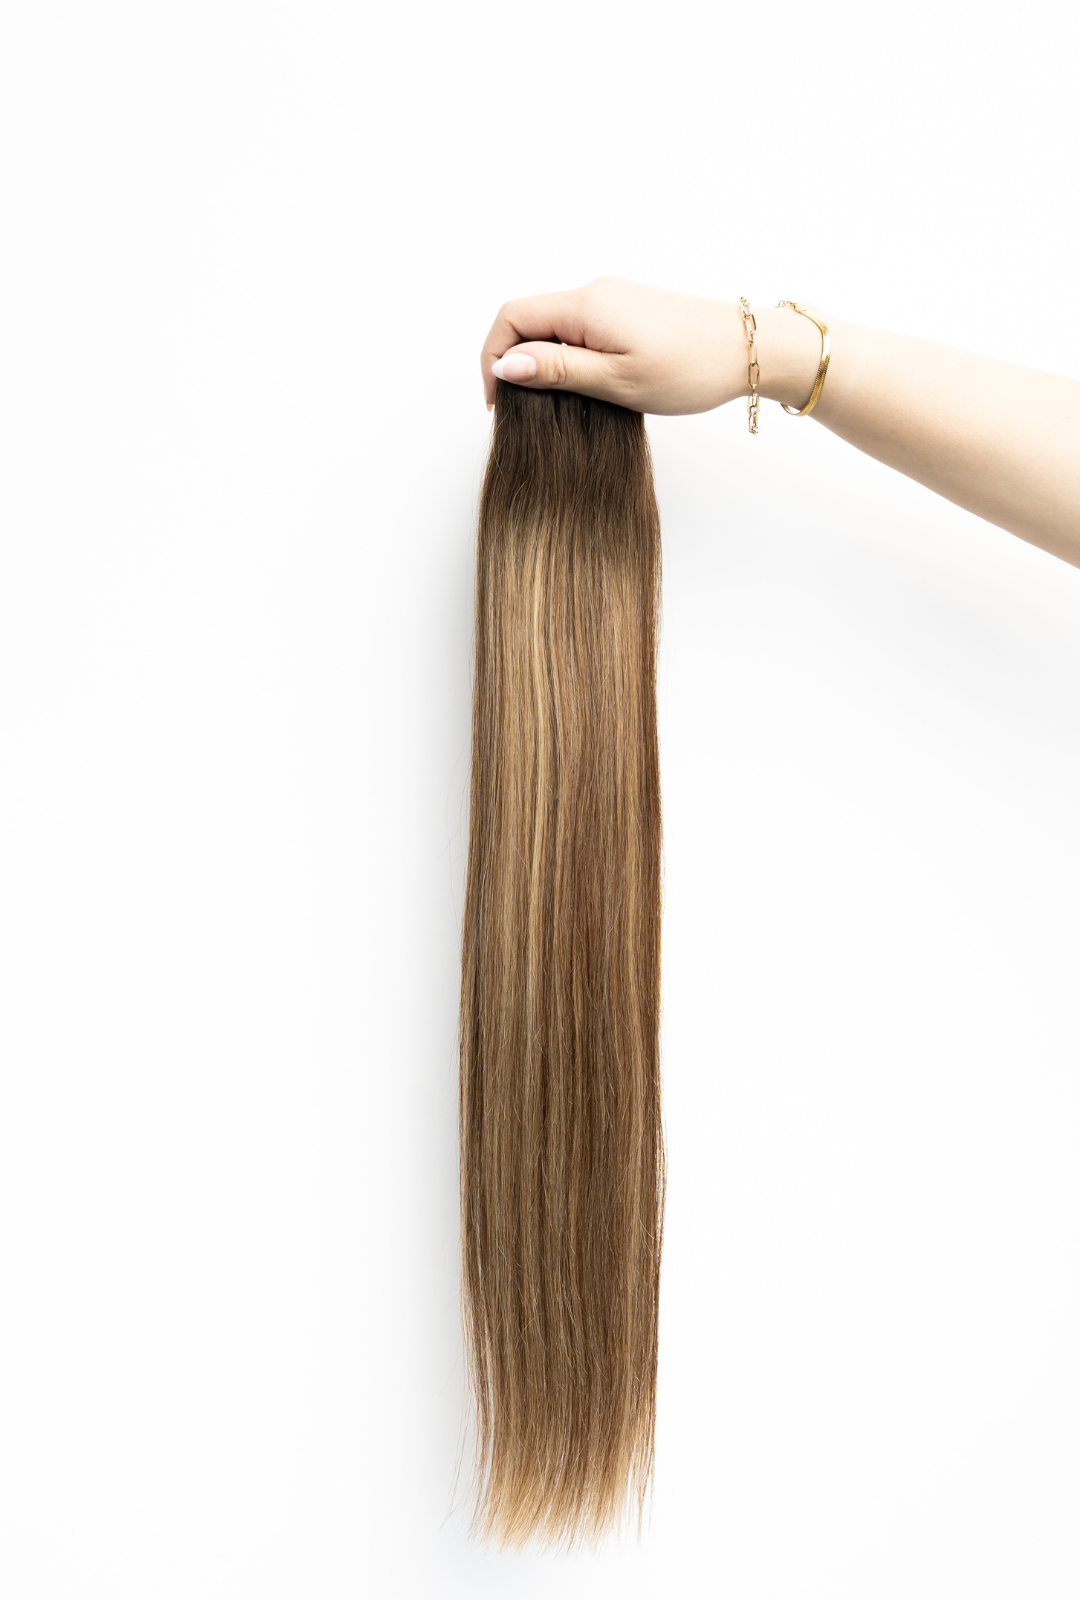 Beachwashed X Laced Hair Machine Sewn Weft Extensions - Sand